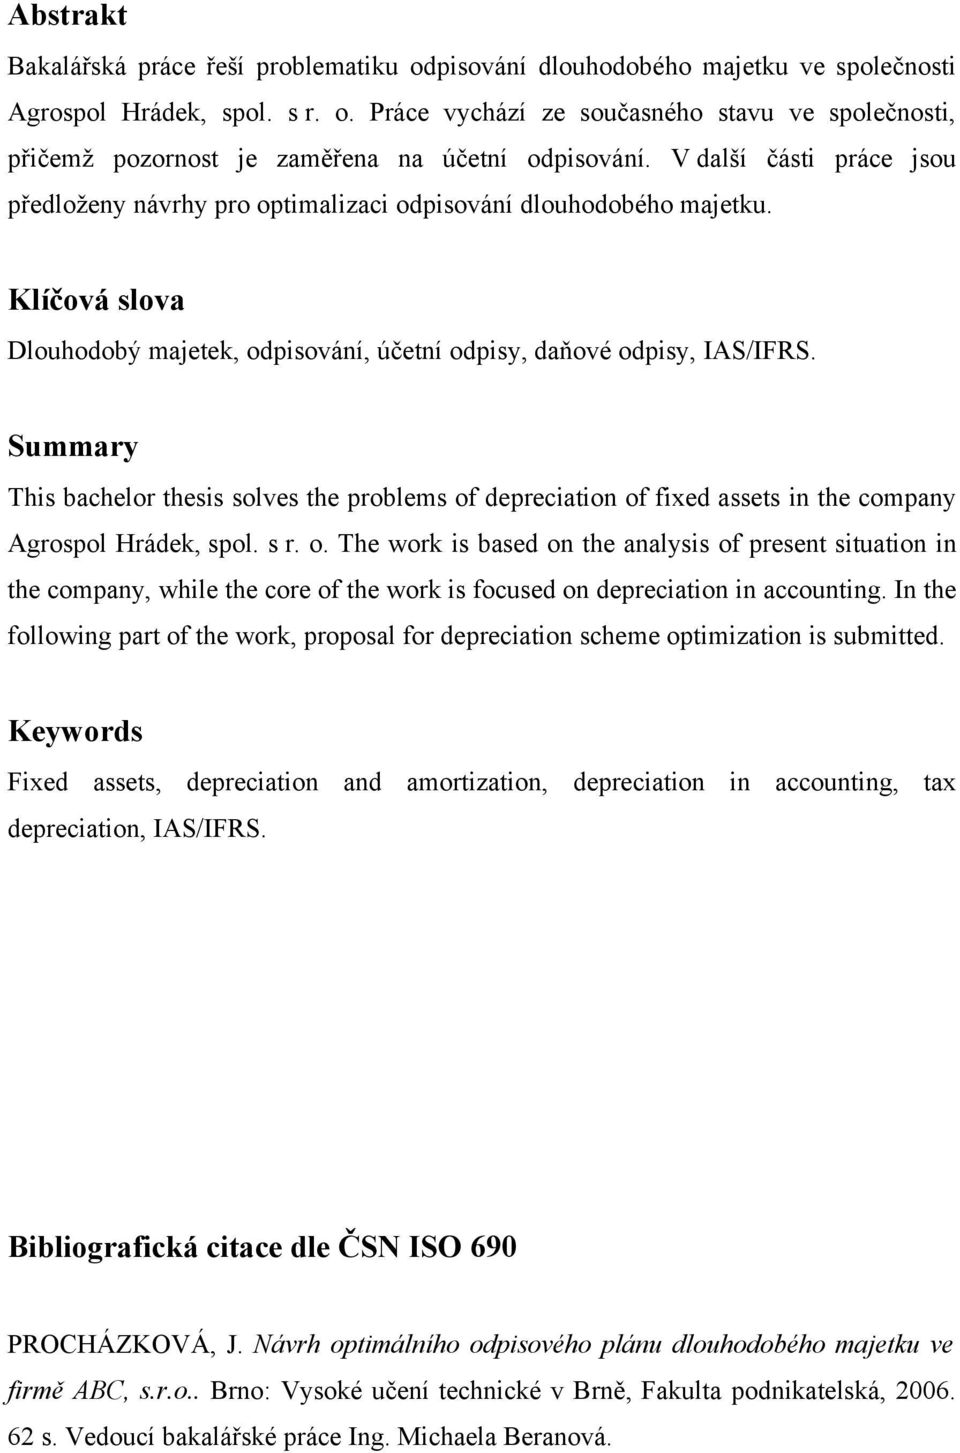 Summary This bachelor thesis solves the problems of depreciation of fixed assets in the company Agrospol Hrádek, spol. s r. o. The work is based on the analysis of present situation in the company, while the core of the work is focused on depreciation in accounting.